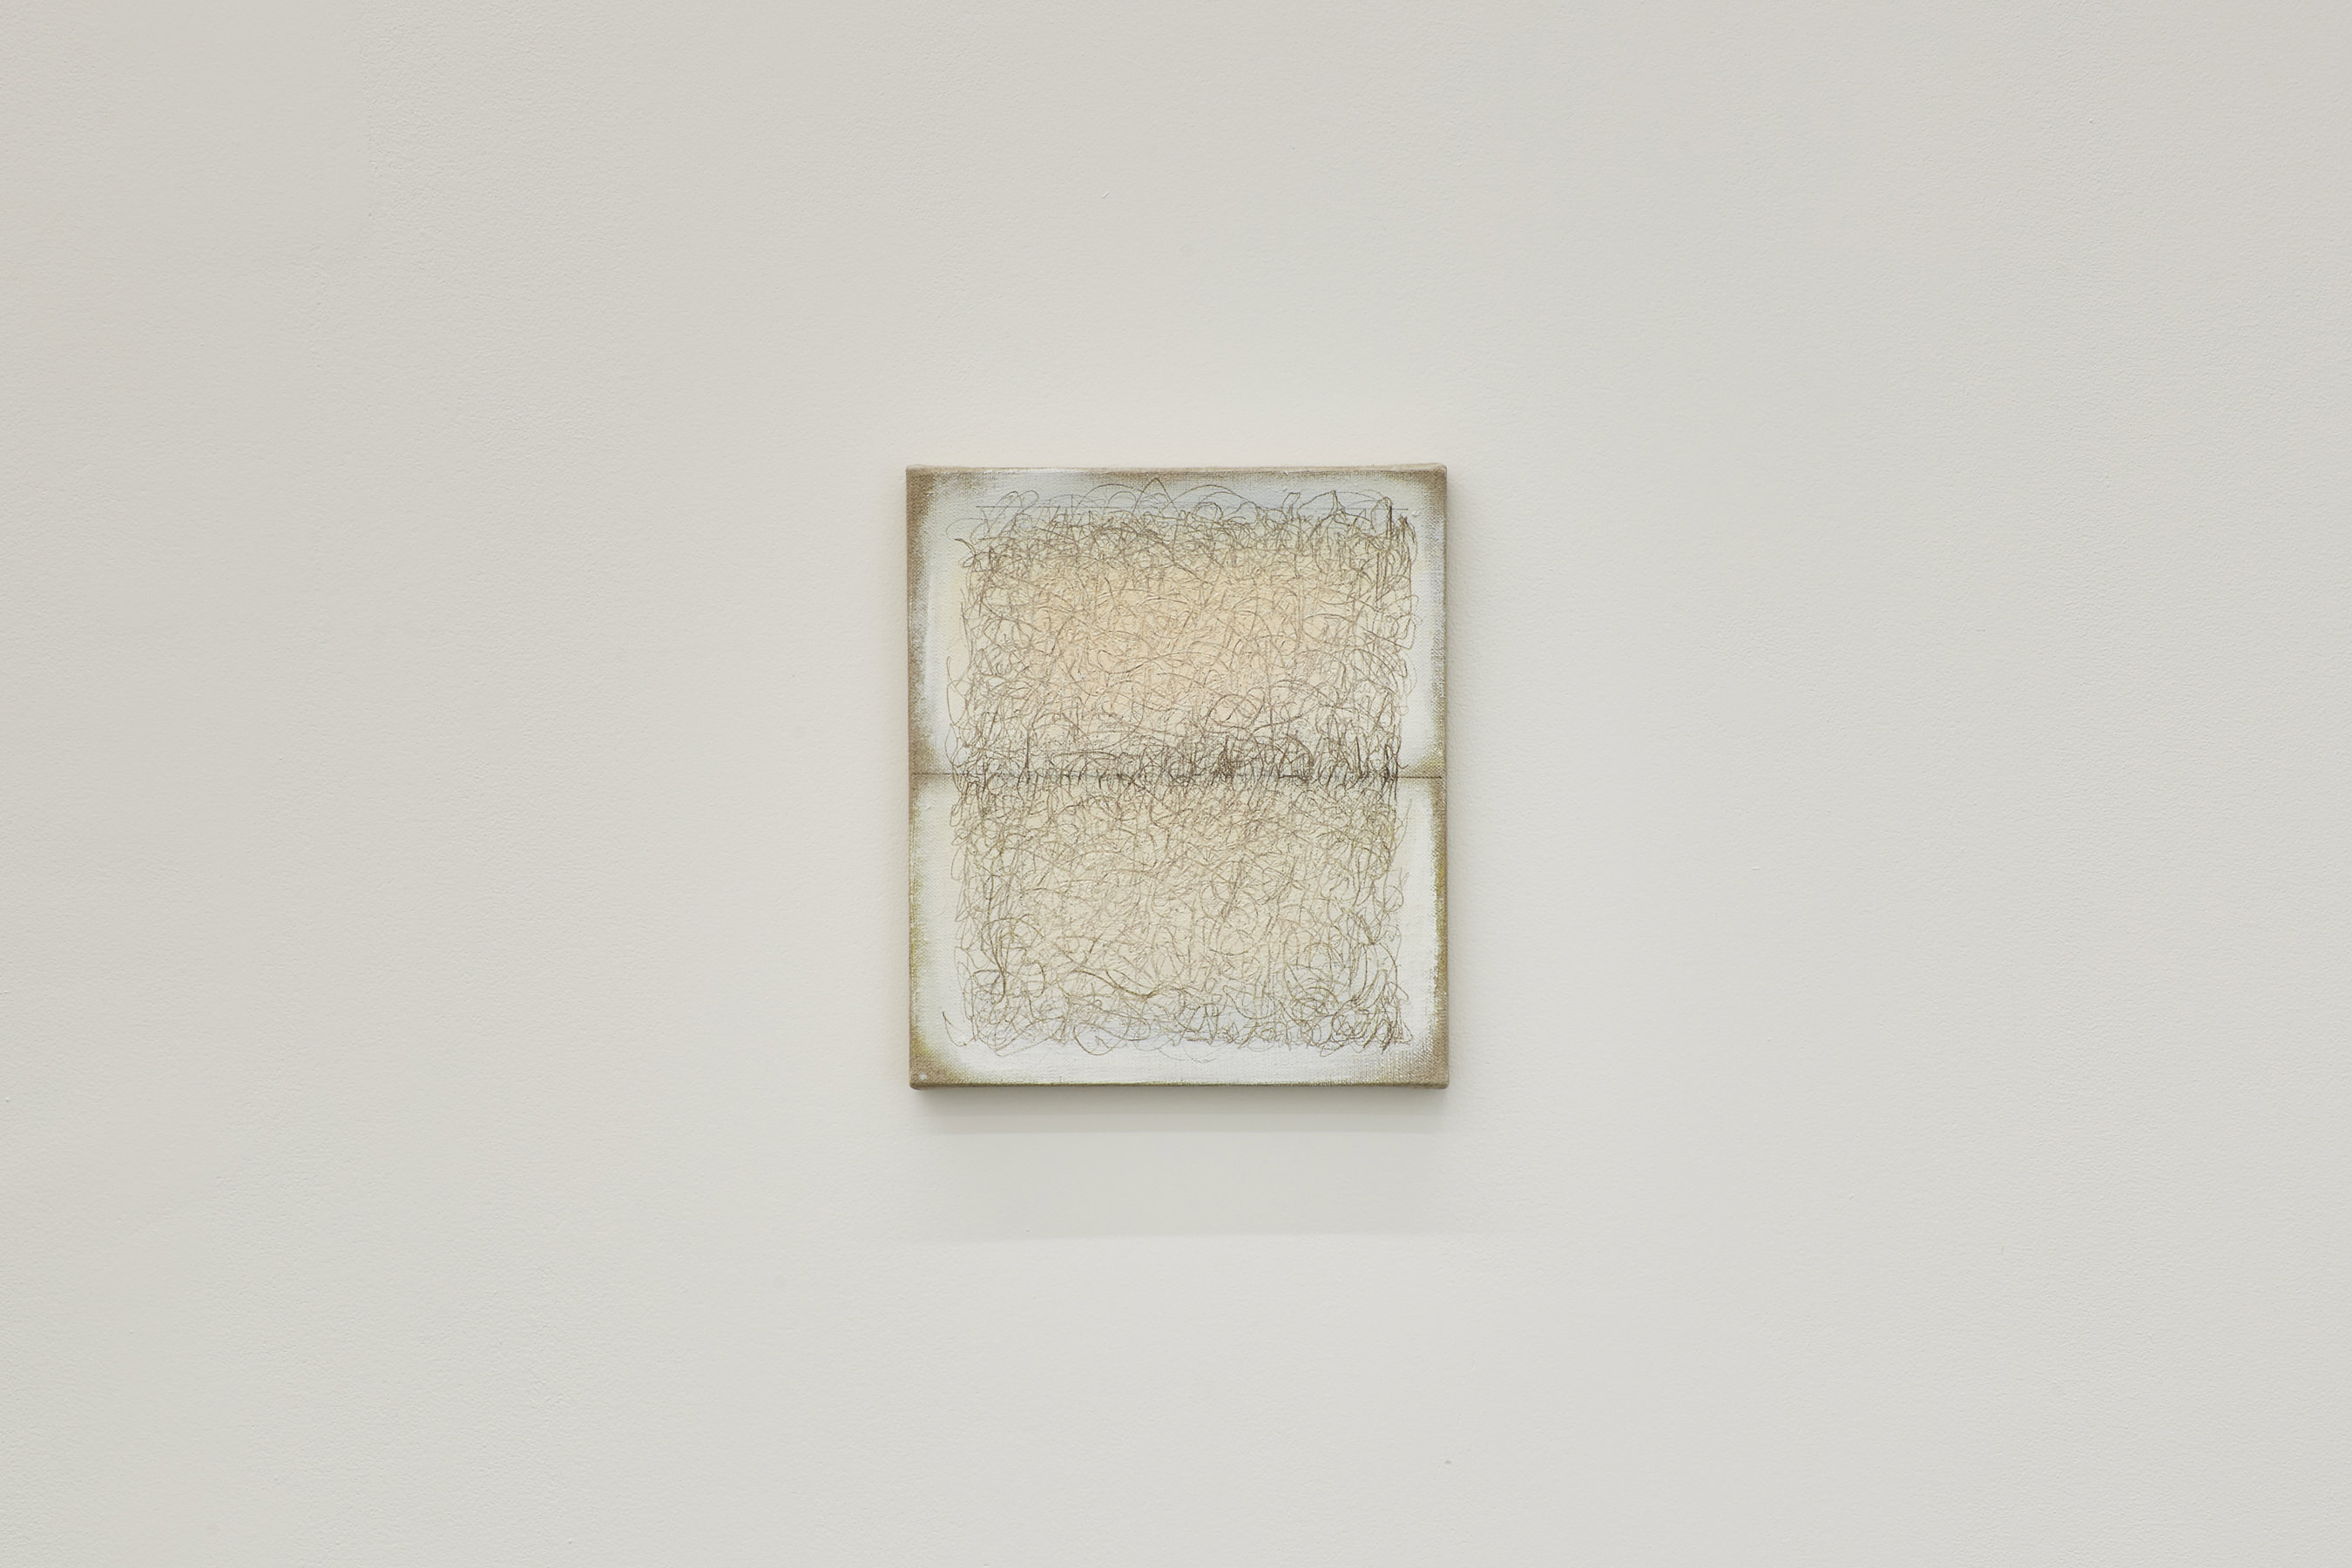 Richard Höglund, Sea Picture LXIII, 2016, silver, tin, lead and oil on linen prepared with bone pulver and marble dust, 30 x 26 cm